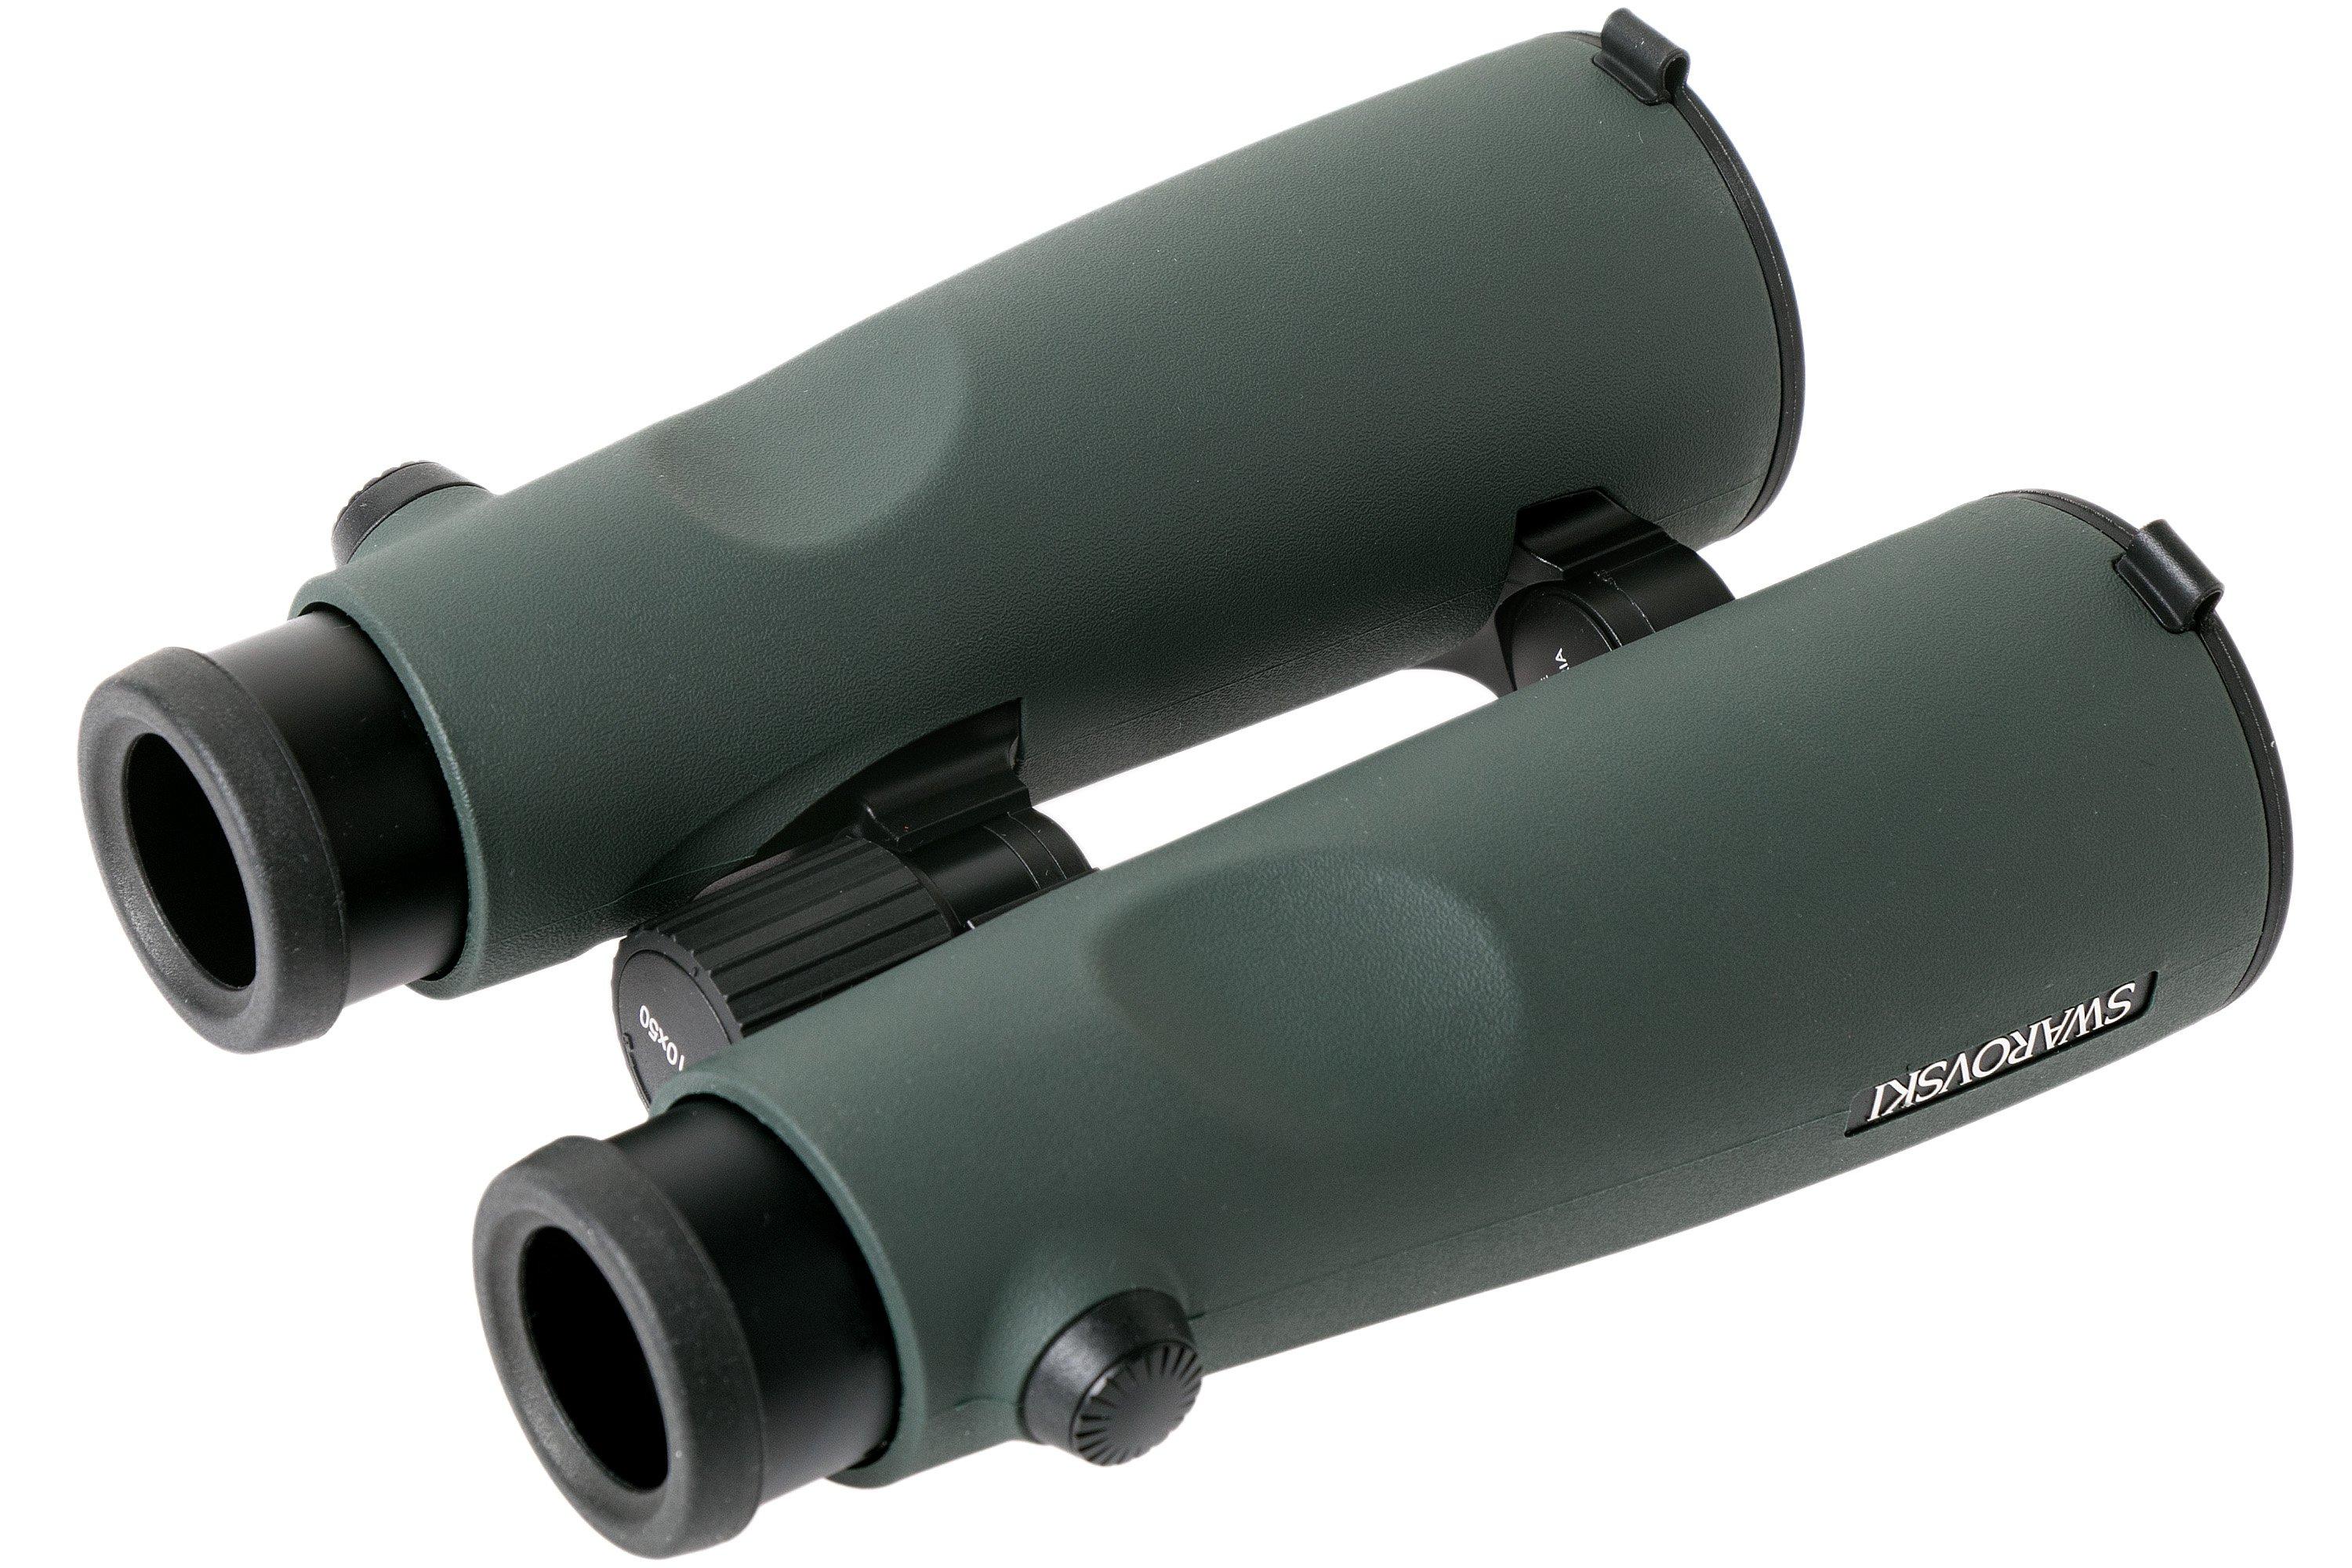 Swarovski 10x50 EL50 FieldPro Binoculars (Green) - Product Photo 9 - View of the bottom of the binoculars with hand grips visible